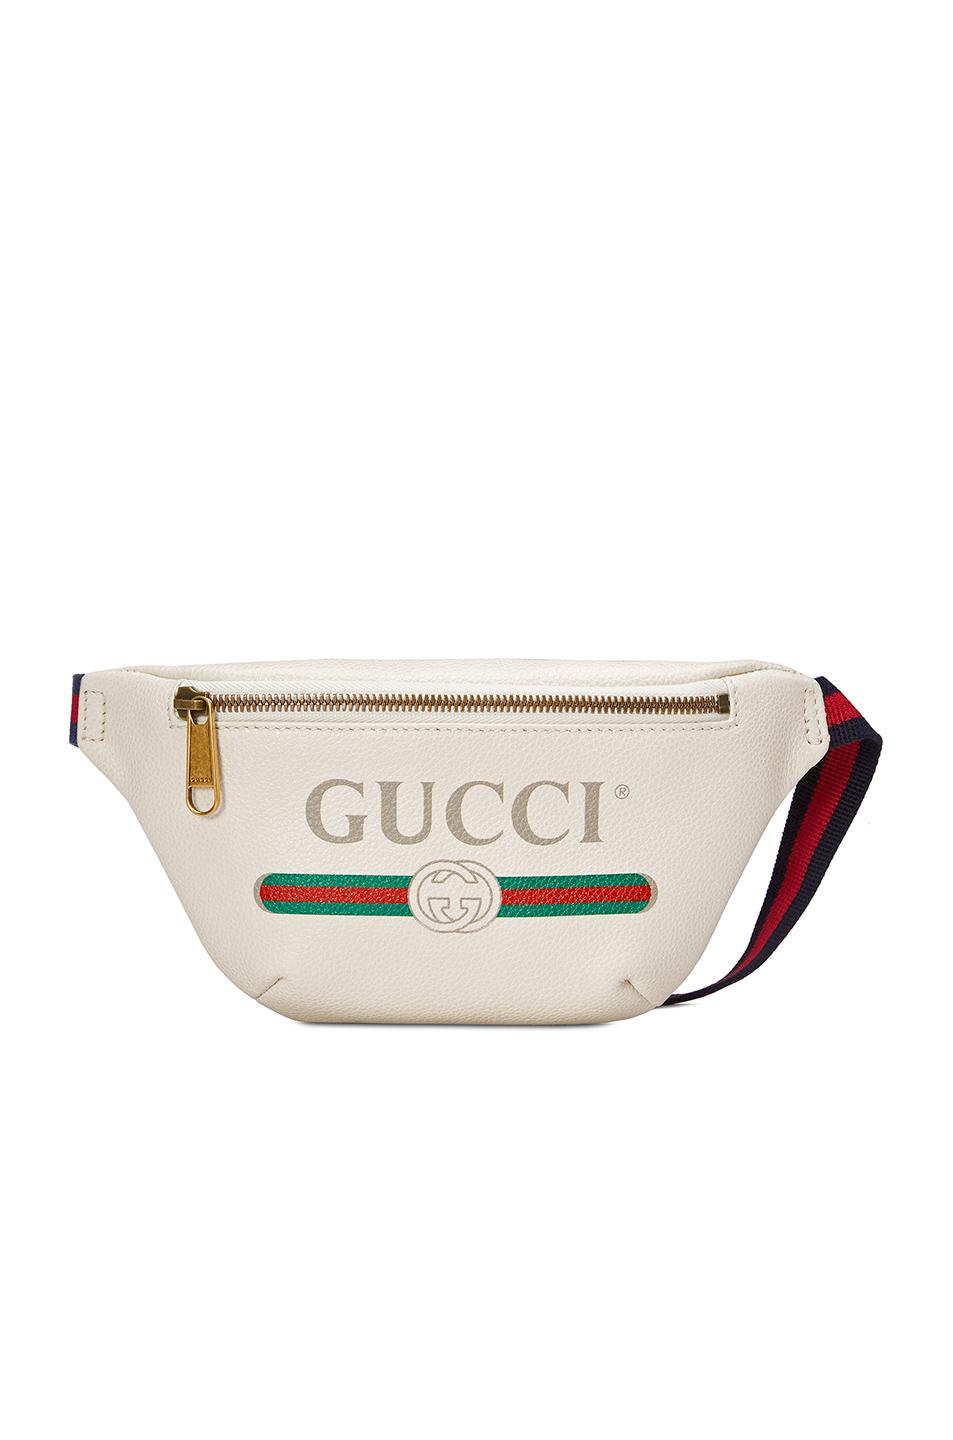 Details more than 73 gucci leather belt bag - in.cdgdbentre